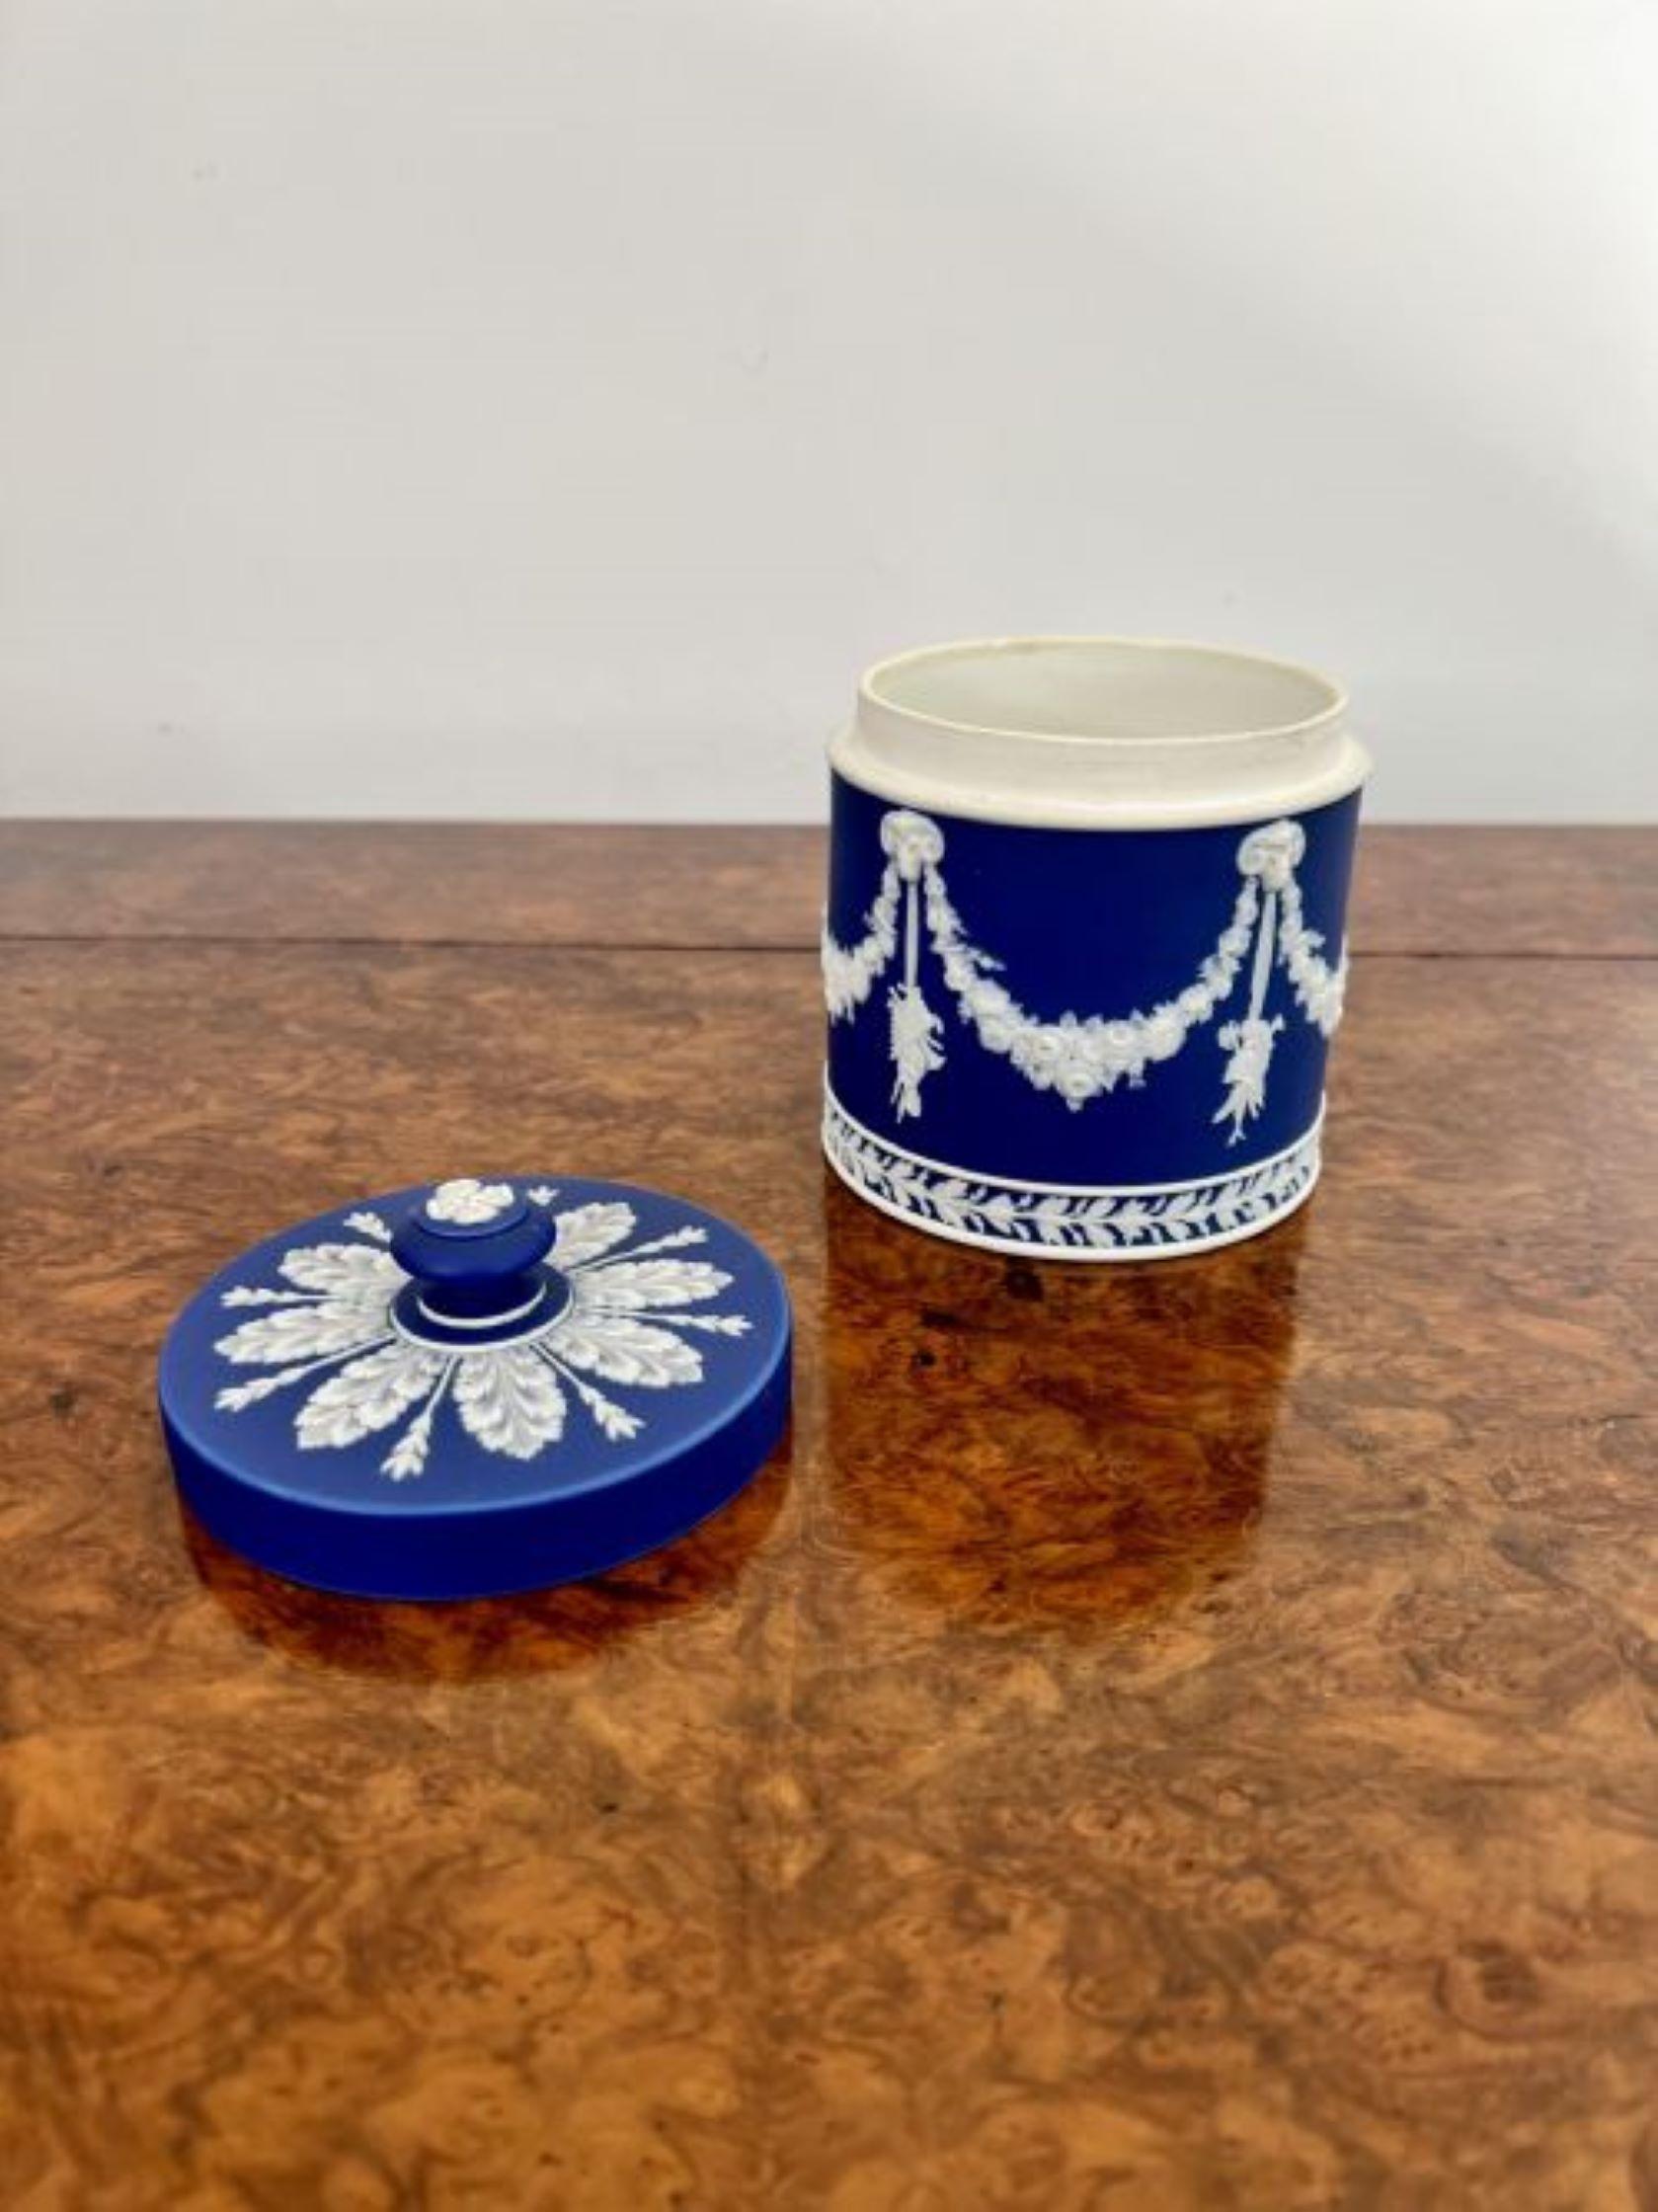 Quality antique Wedgwood jar and cover having a quality antique Jasperware Wedgwood jar and cover with fantastic white enamel decoration on a blue background. 